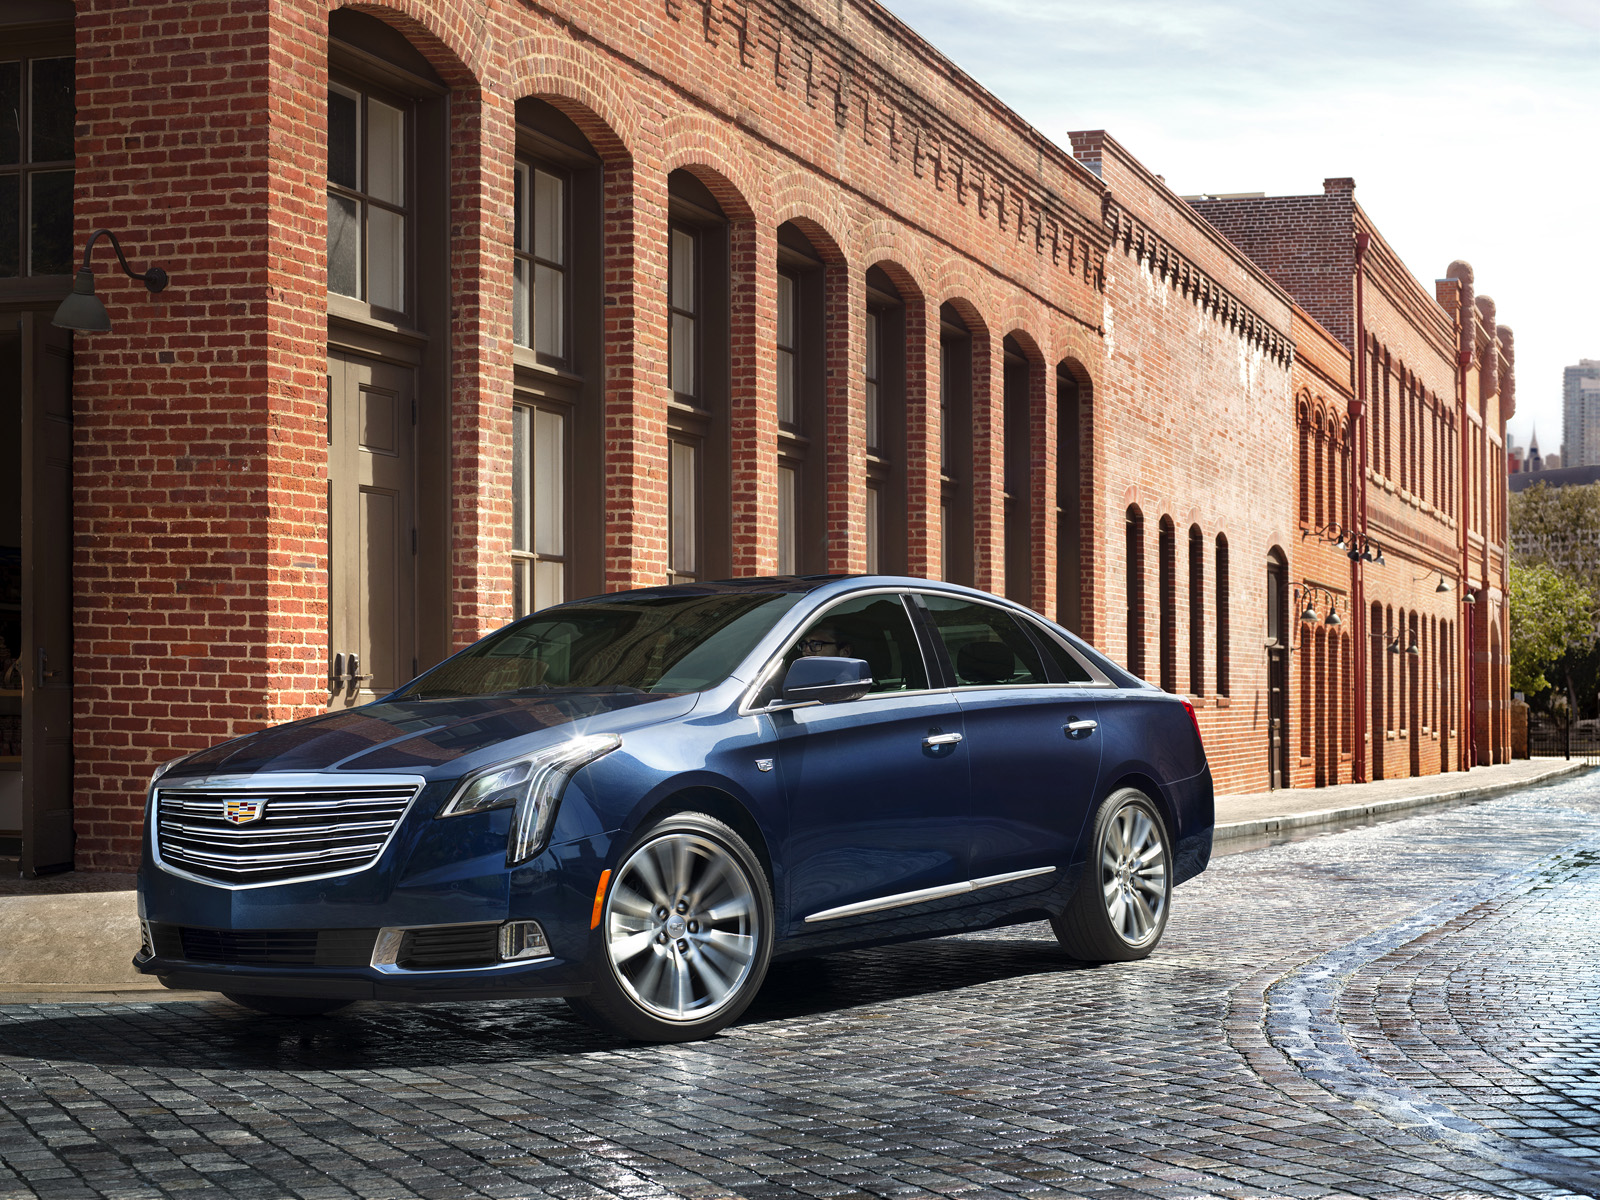 The 2018 Cadillac XTS luxury sedan is elevated with the new gene